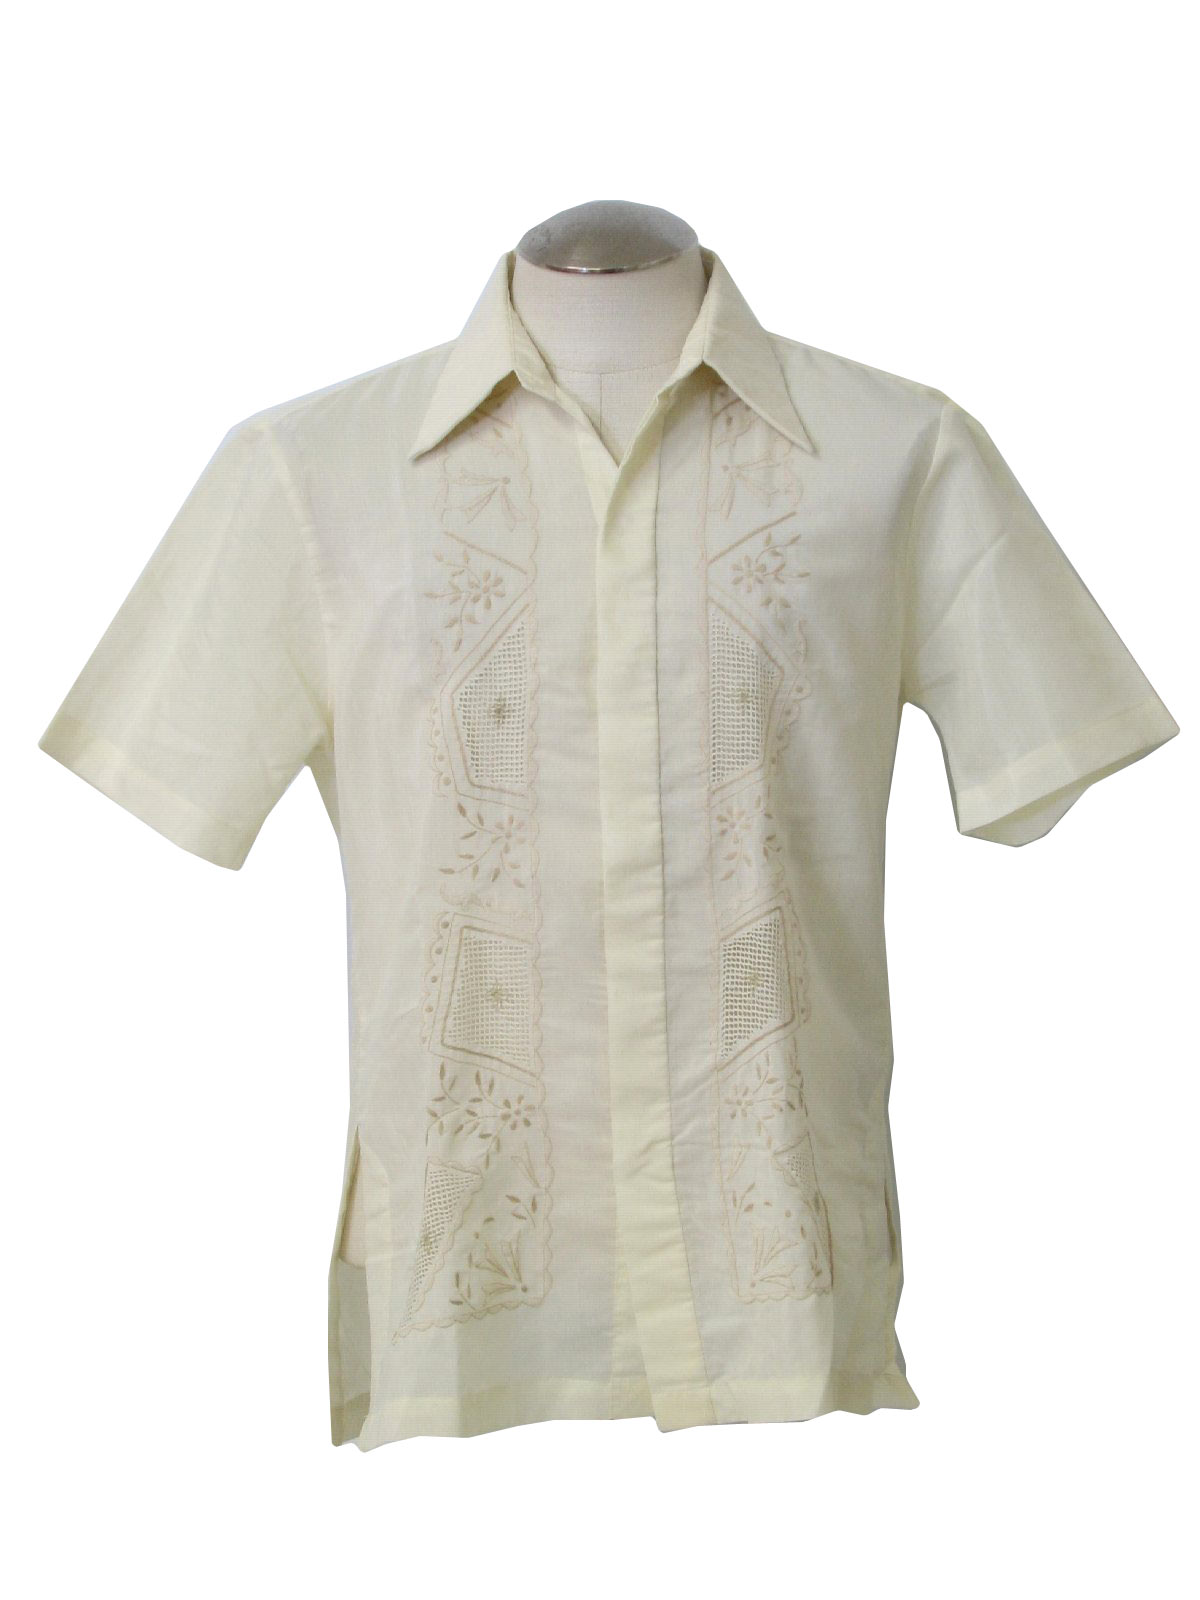 70's Vintage Guayabera Shirt: Late 70s or early 80s -Caravelle- Mens ...